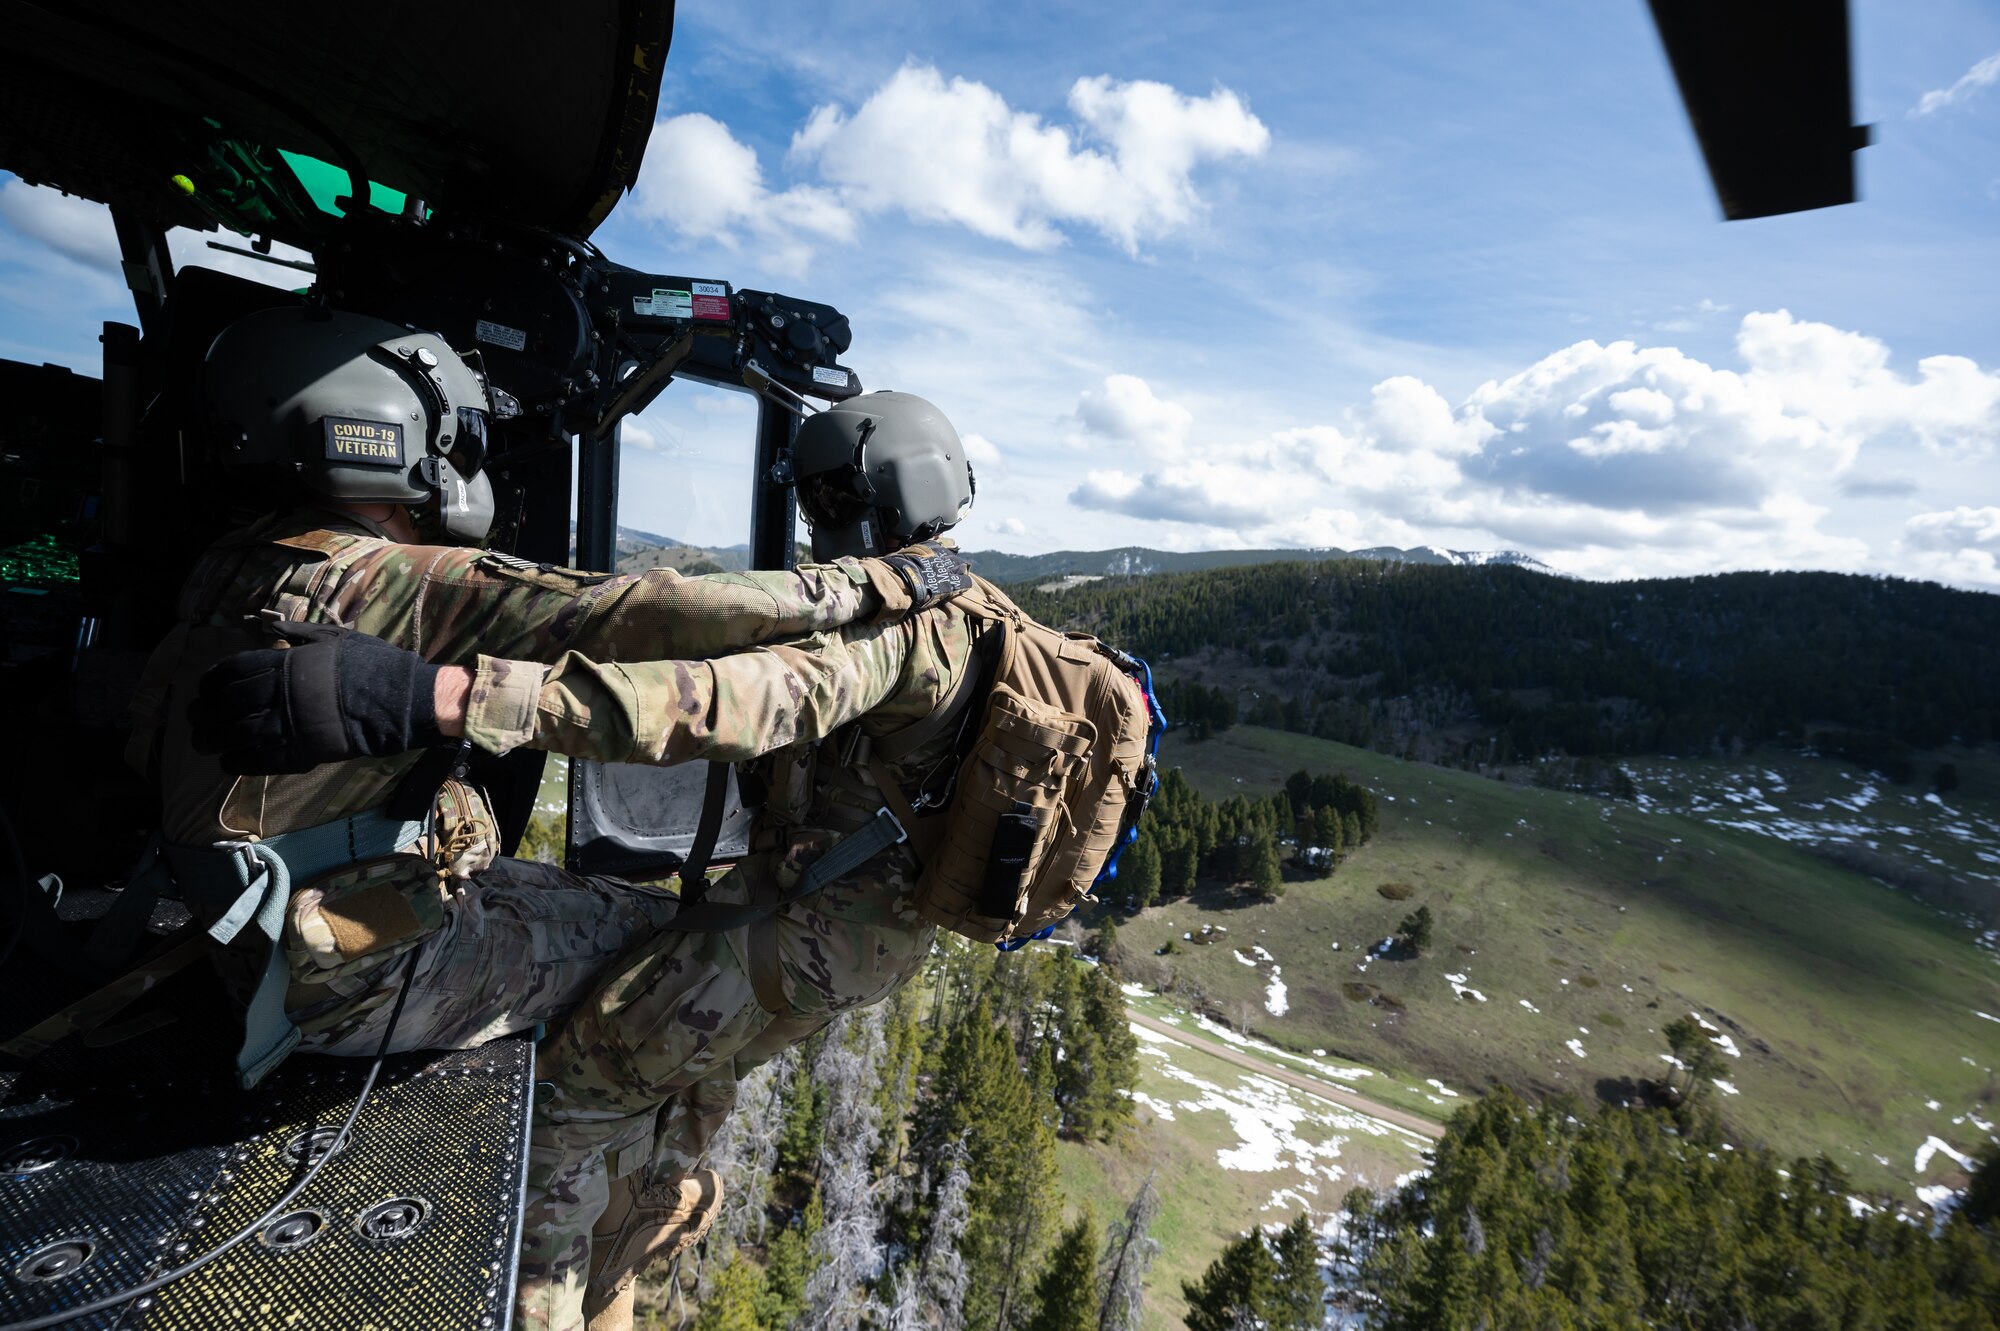 Staff Sgt. Chase Rose, 40th Helicopter Squadron flight engineer, hoists Capt. Noah Russell, 341st Operational Medical Readiness Squadron flight physician, into an UH-1N Huey helicopter during a search and rescue exercise May 24, 2022, over the Highwood Mountains near Great Falls, Mont.